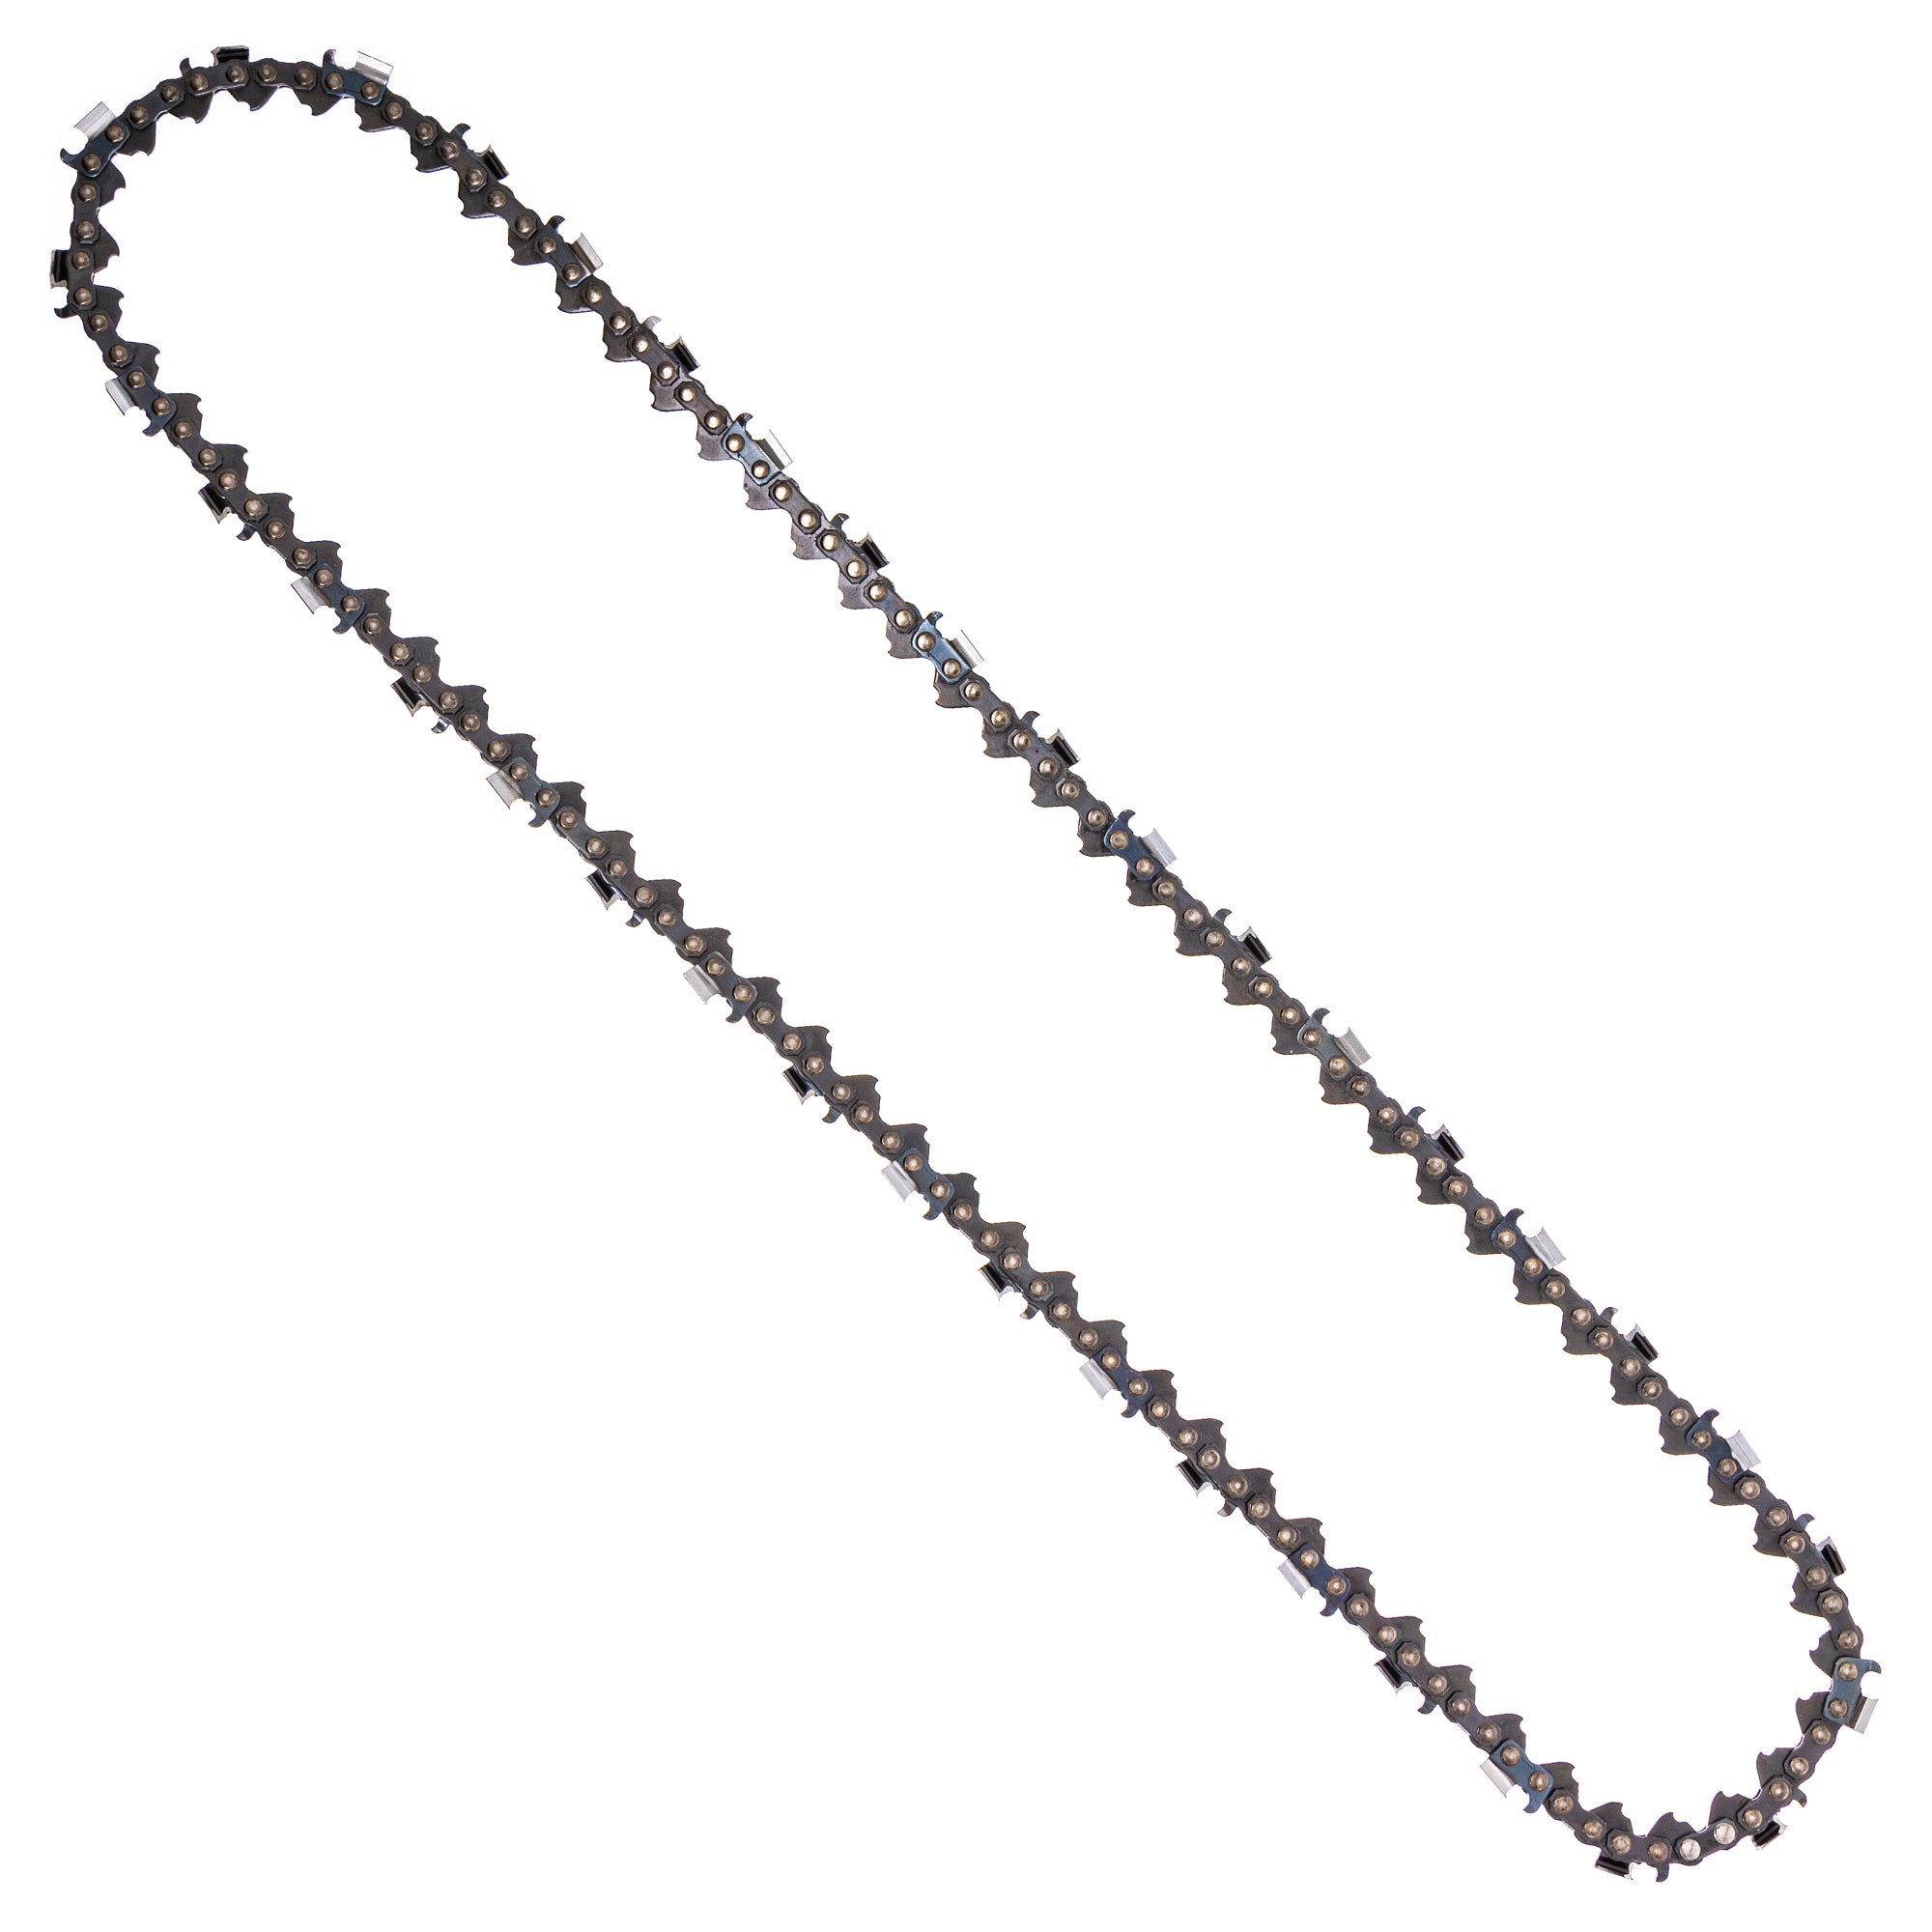 8TEN 810-CCC2230H Chain 3-Pack for zOTHER Stens Oregon Husqvarna